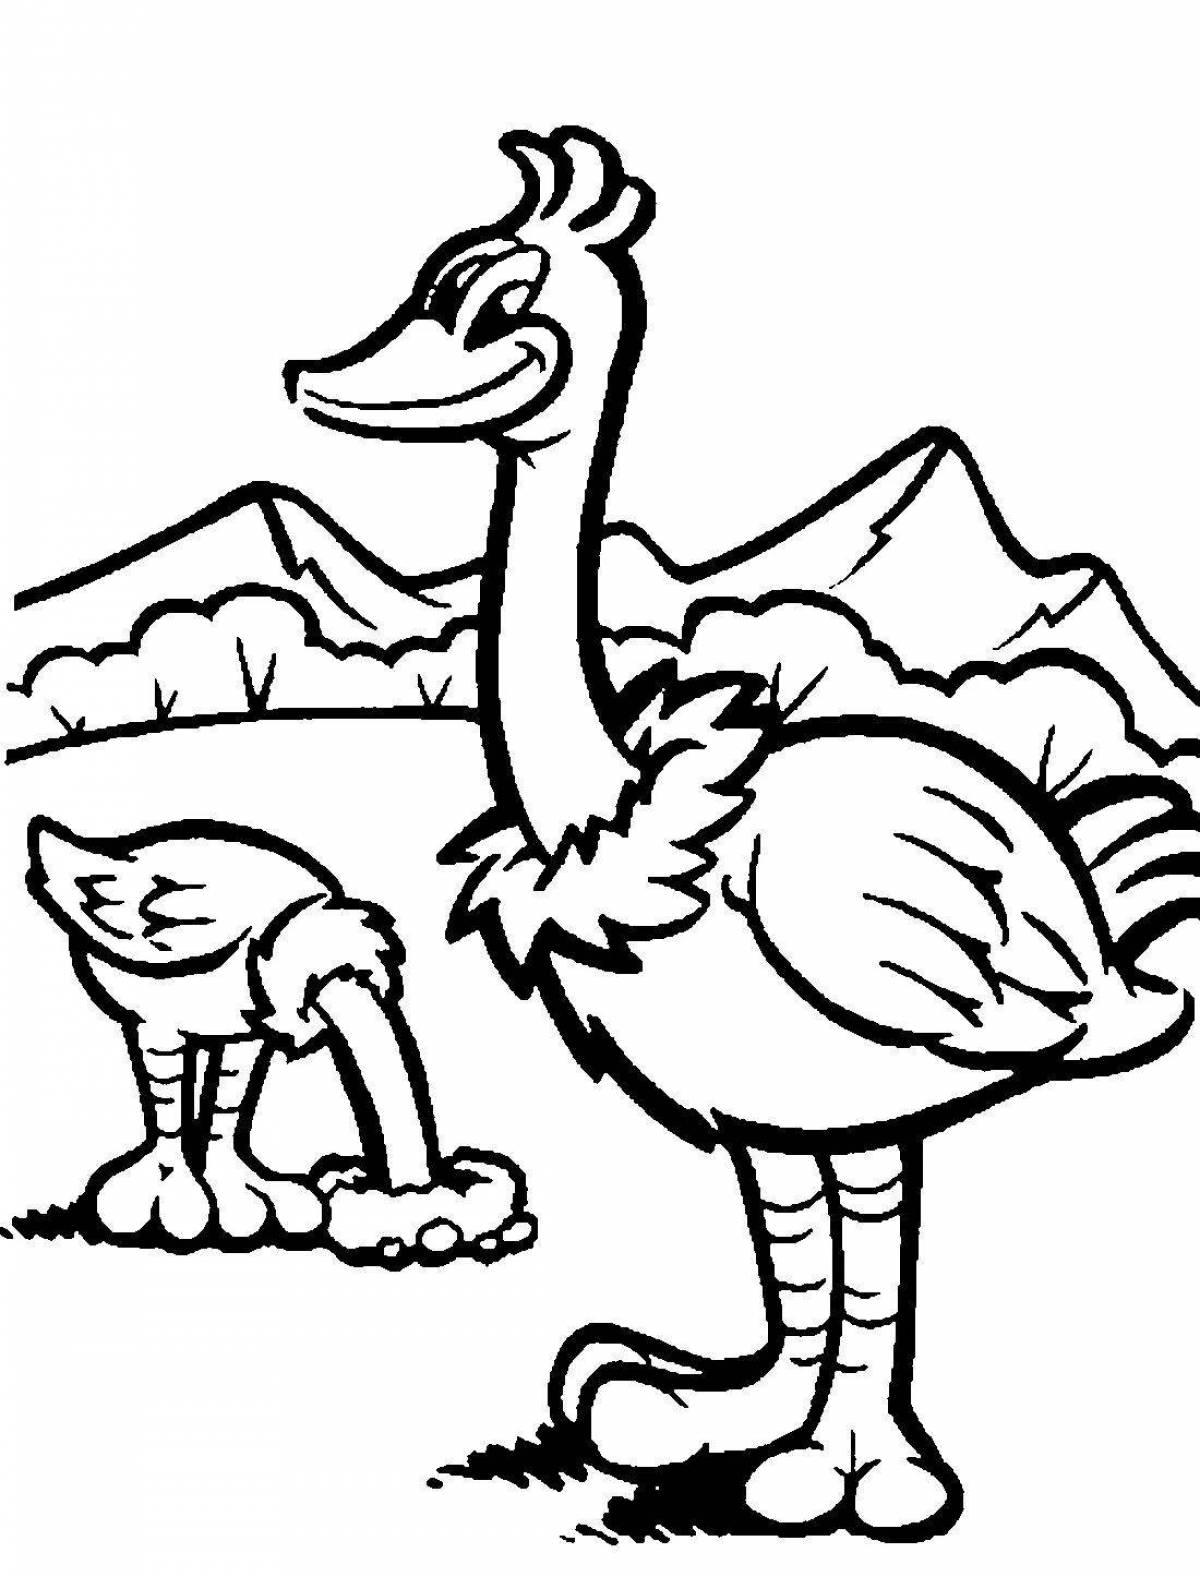 Coloring emu for kids